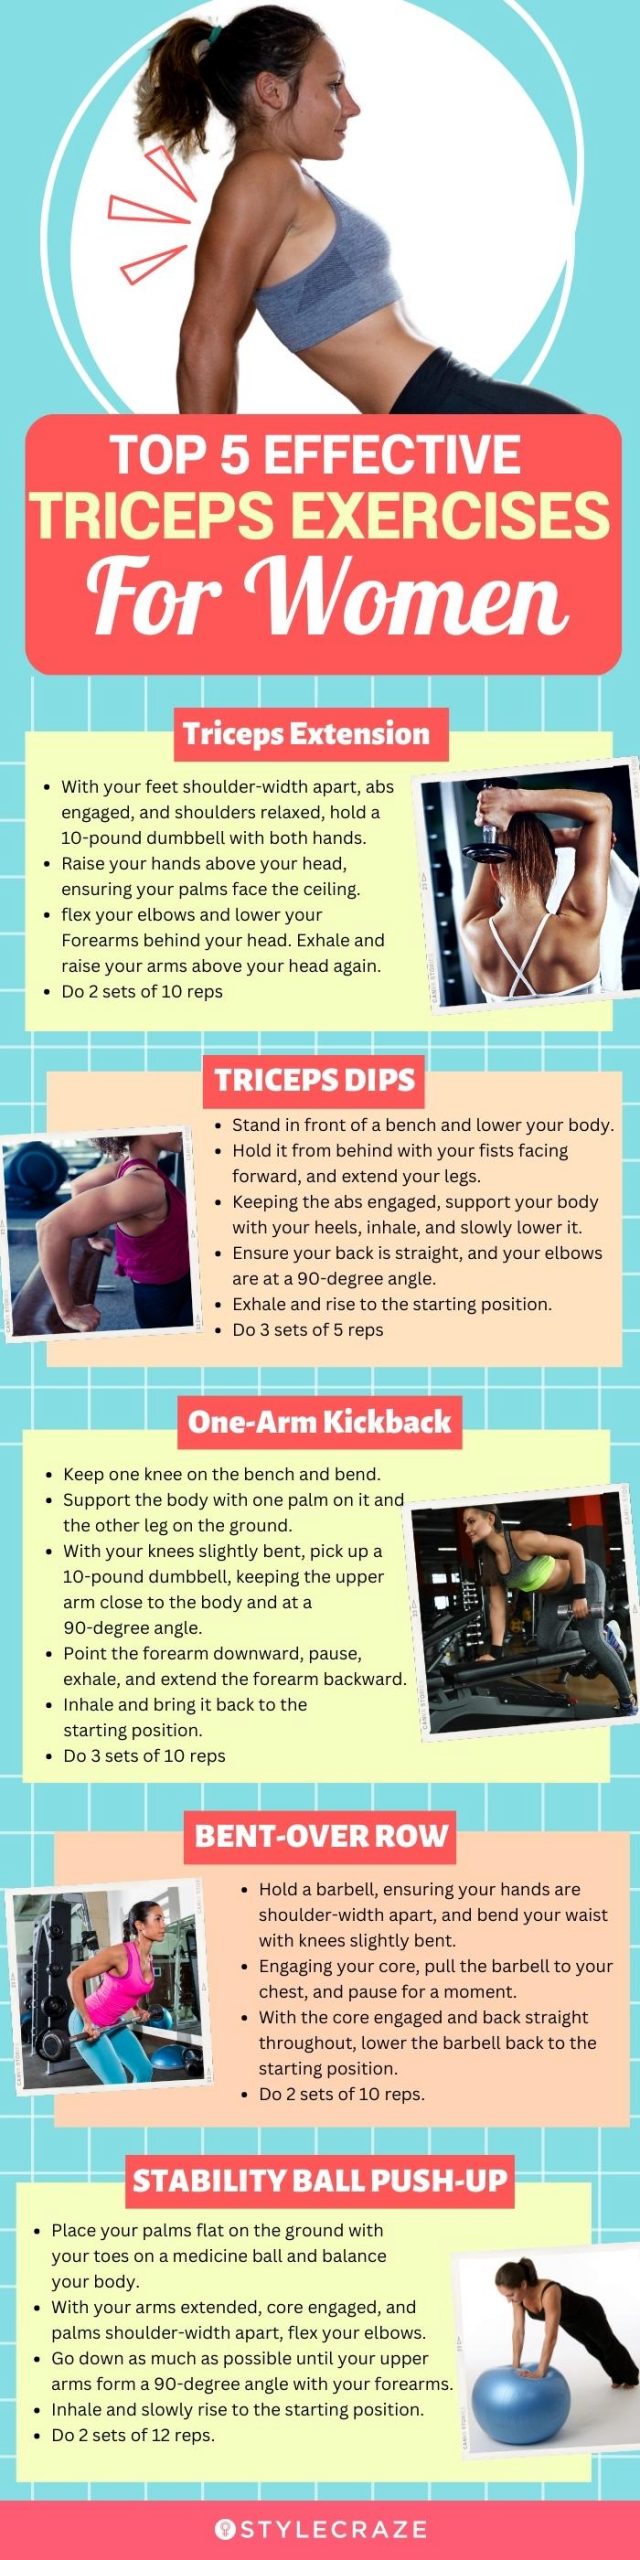 top 5 effective triceps exercises for women (infographic)